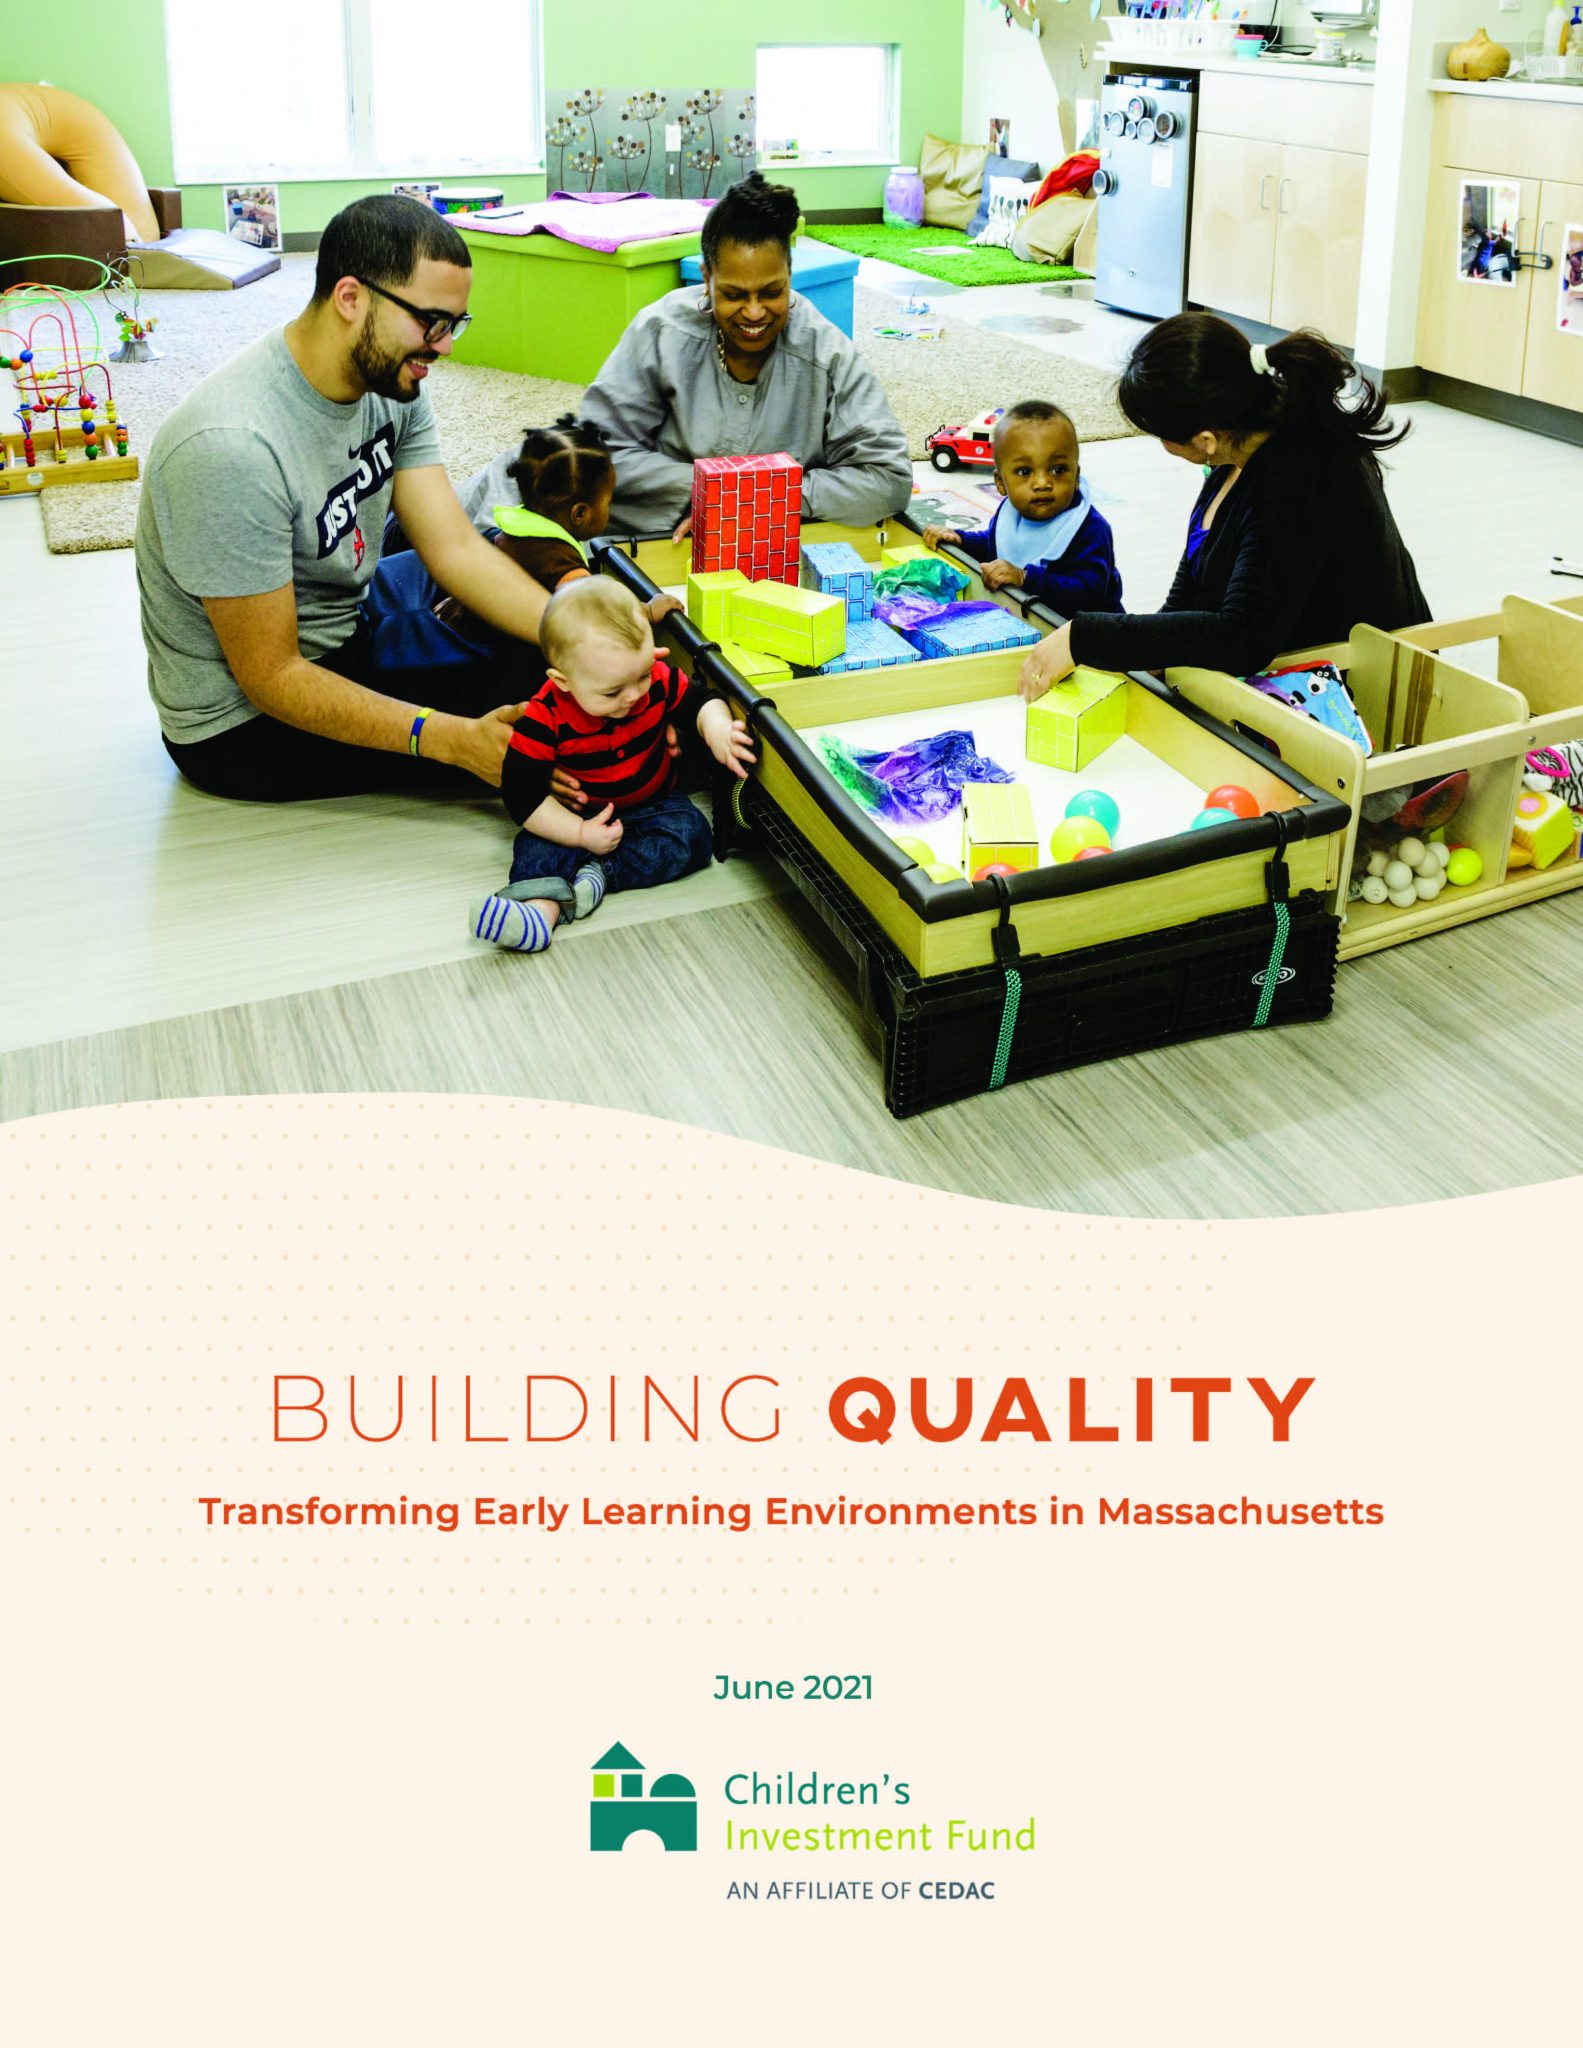 Building Quality: Transforming Early Learning Environments in Massachusetts